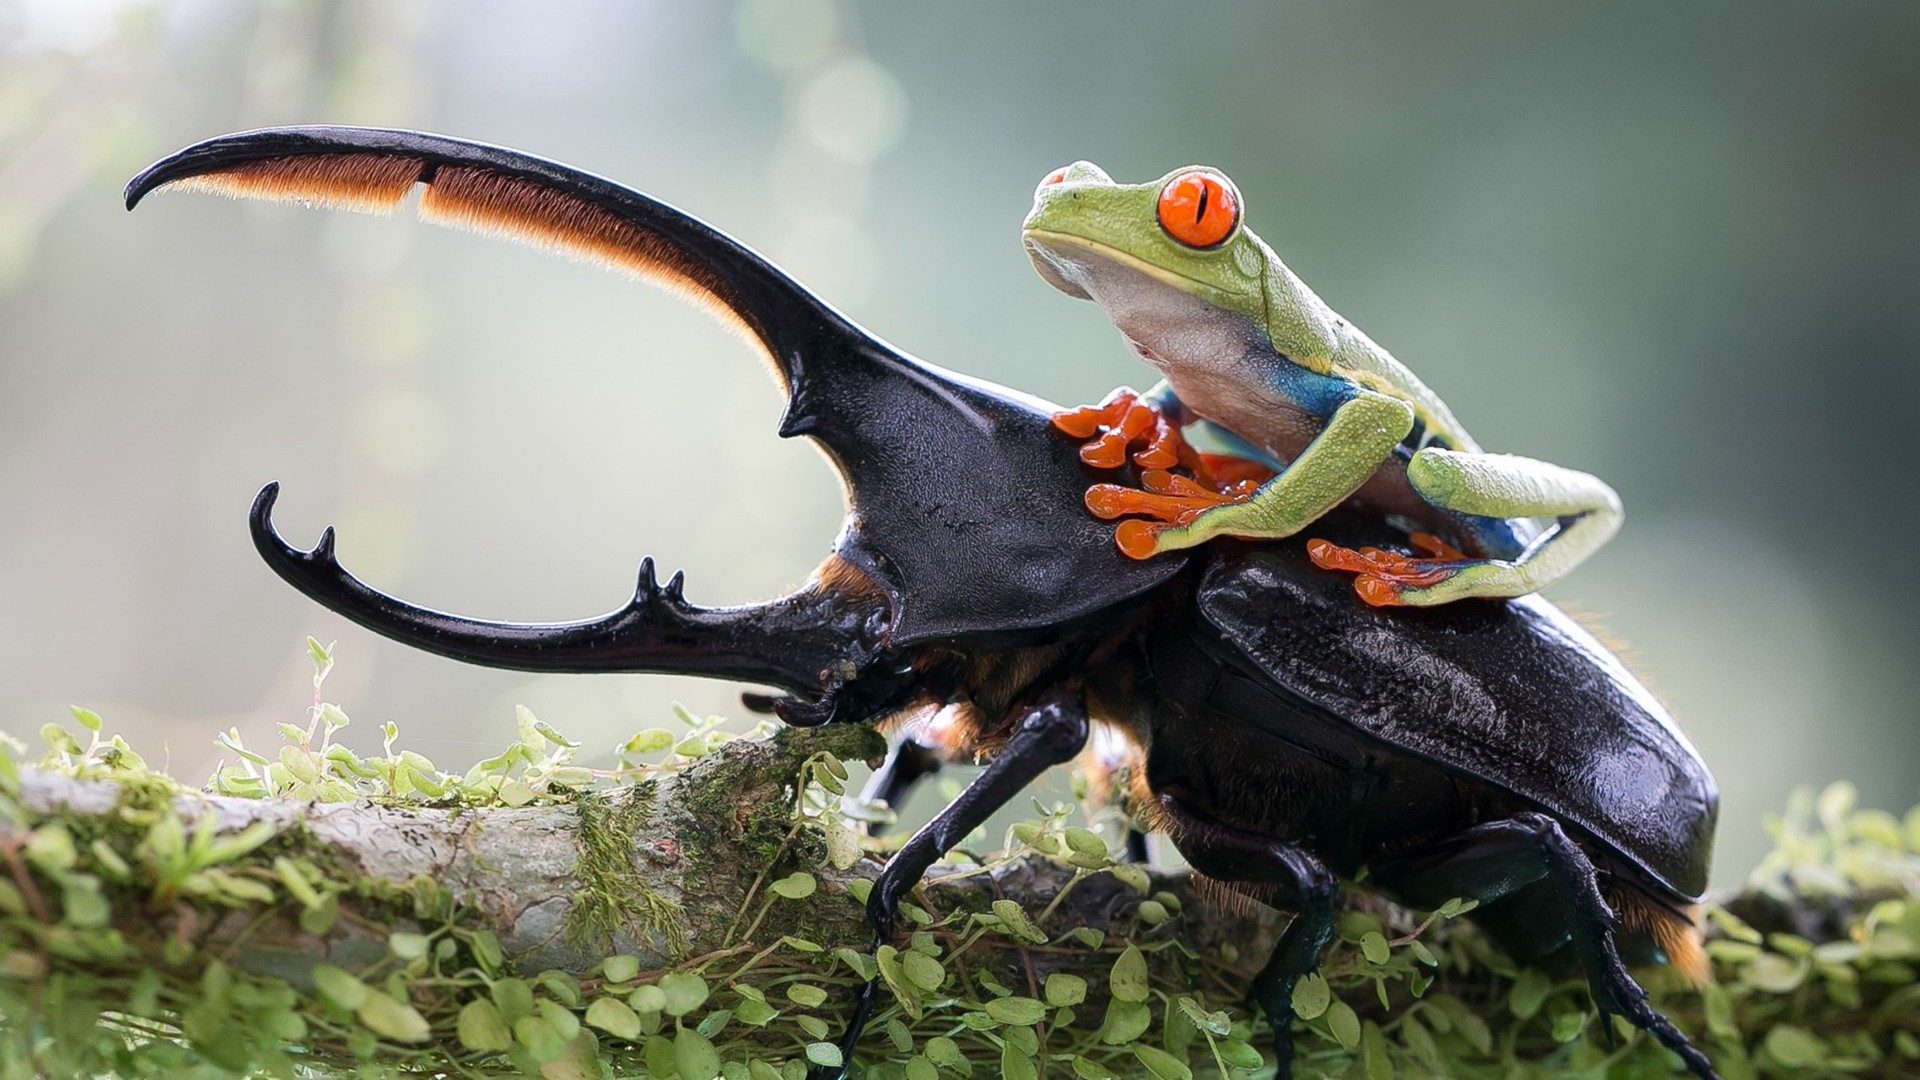 animals, Frog, Insect, Nature, Red Eyed Tree Frogs, Amphibian, Beetles Wallpaper